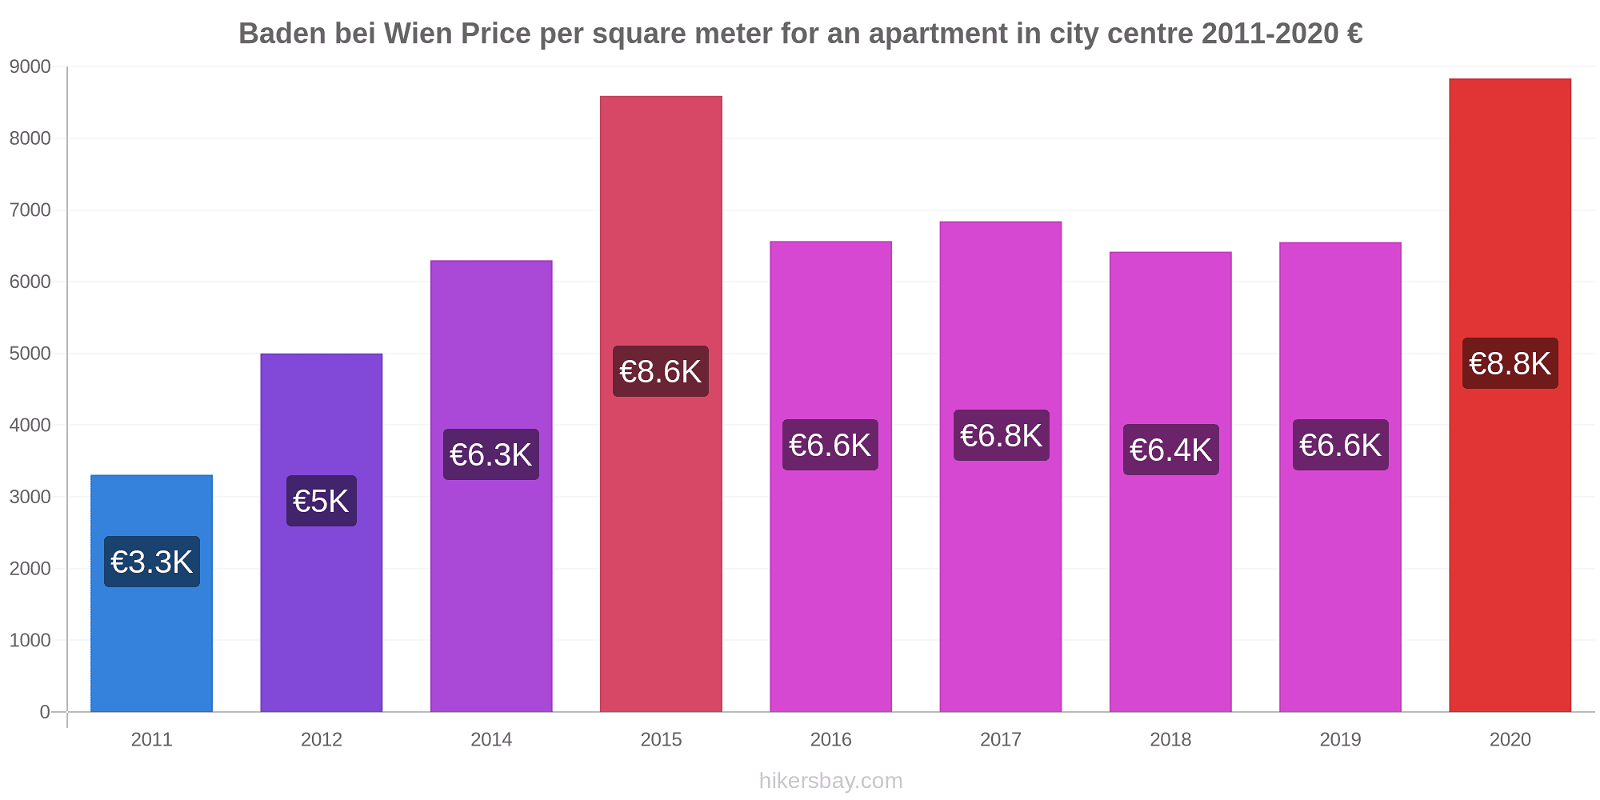 Baden bei Wien price changes Price per square meter for an apartment in city centre hikersbay.com